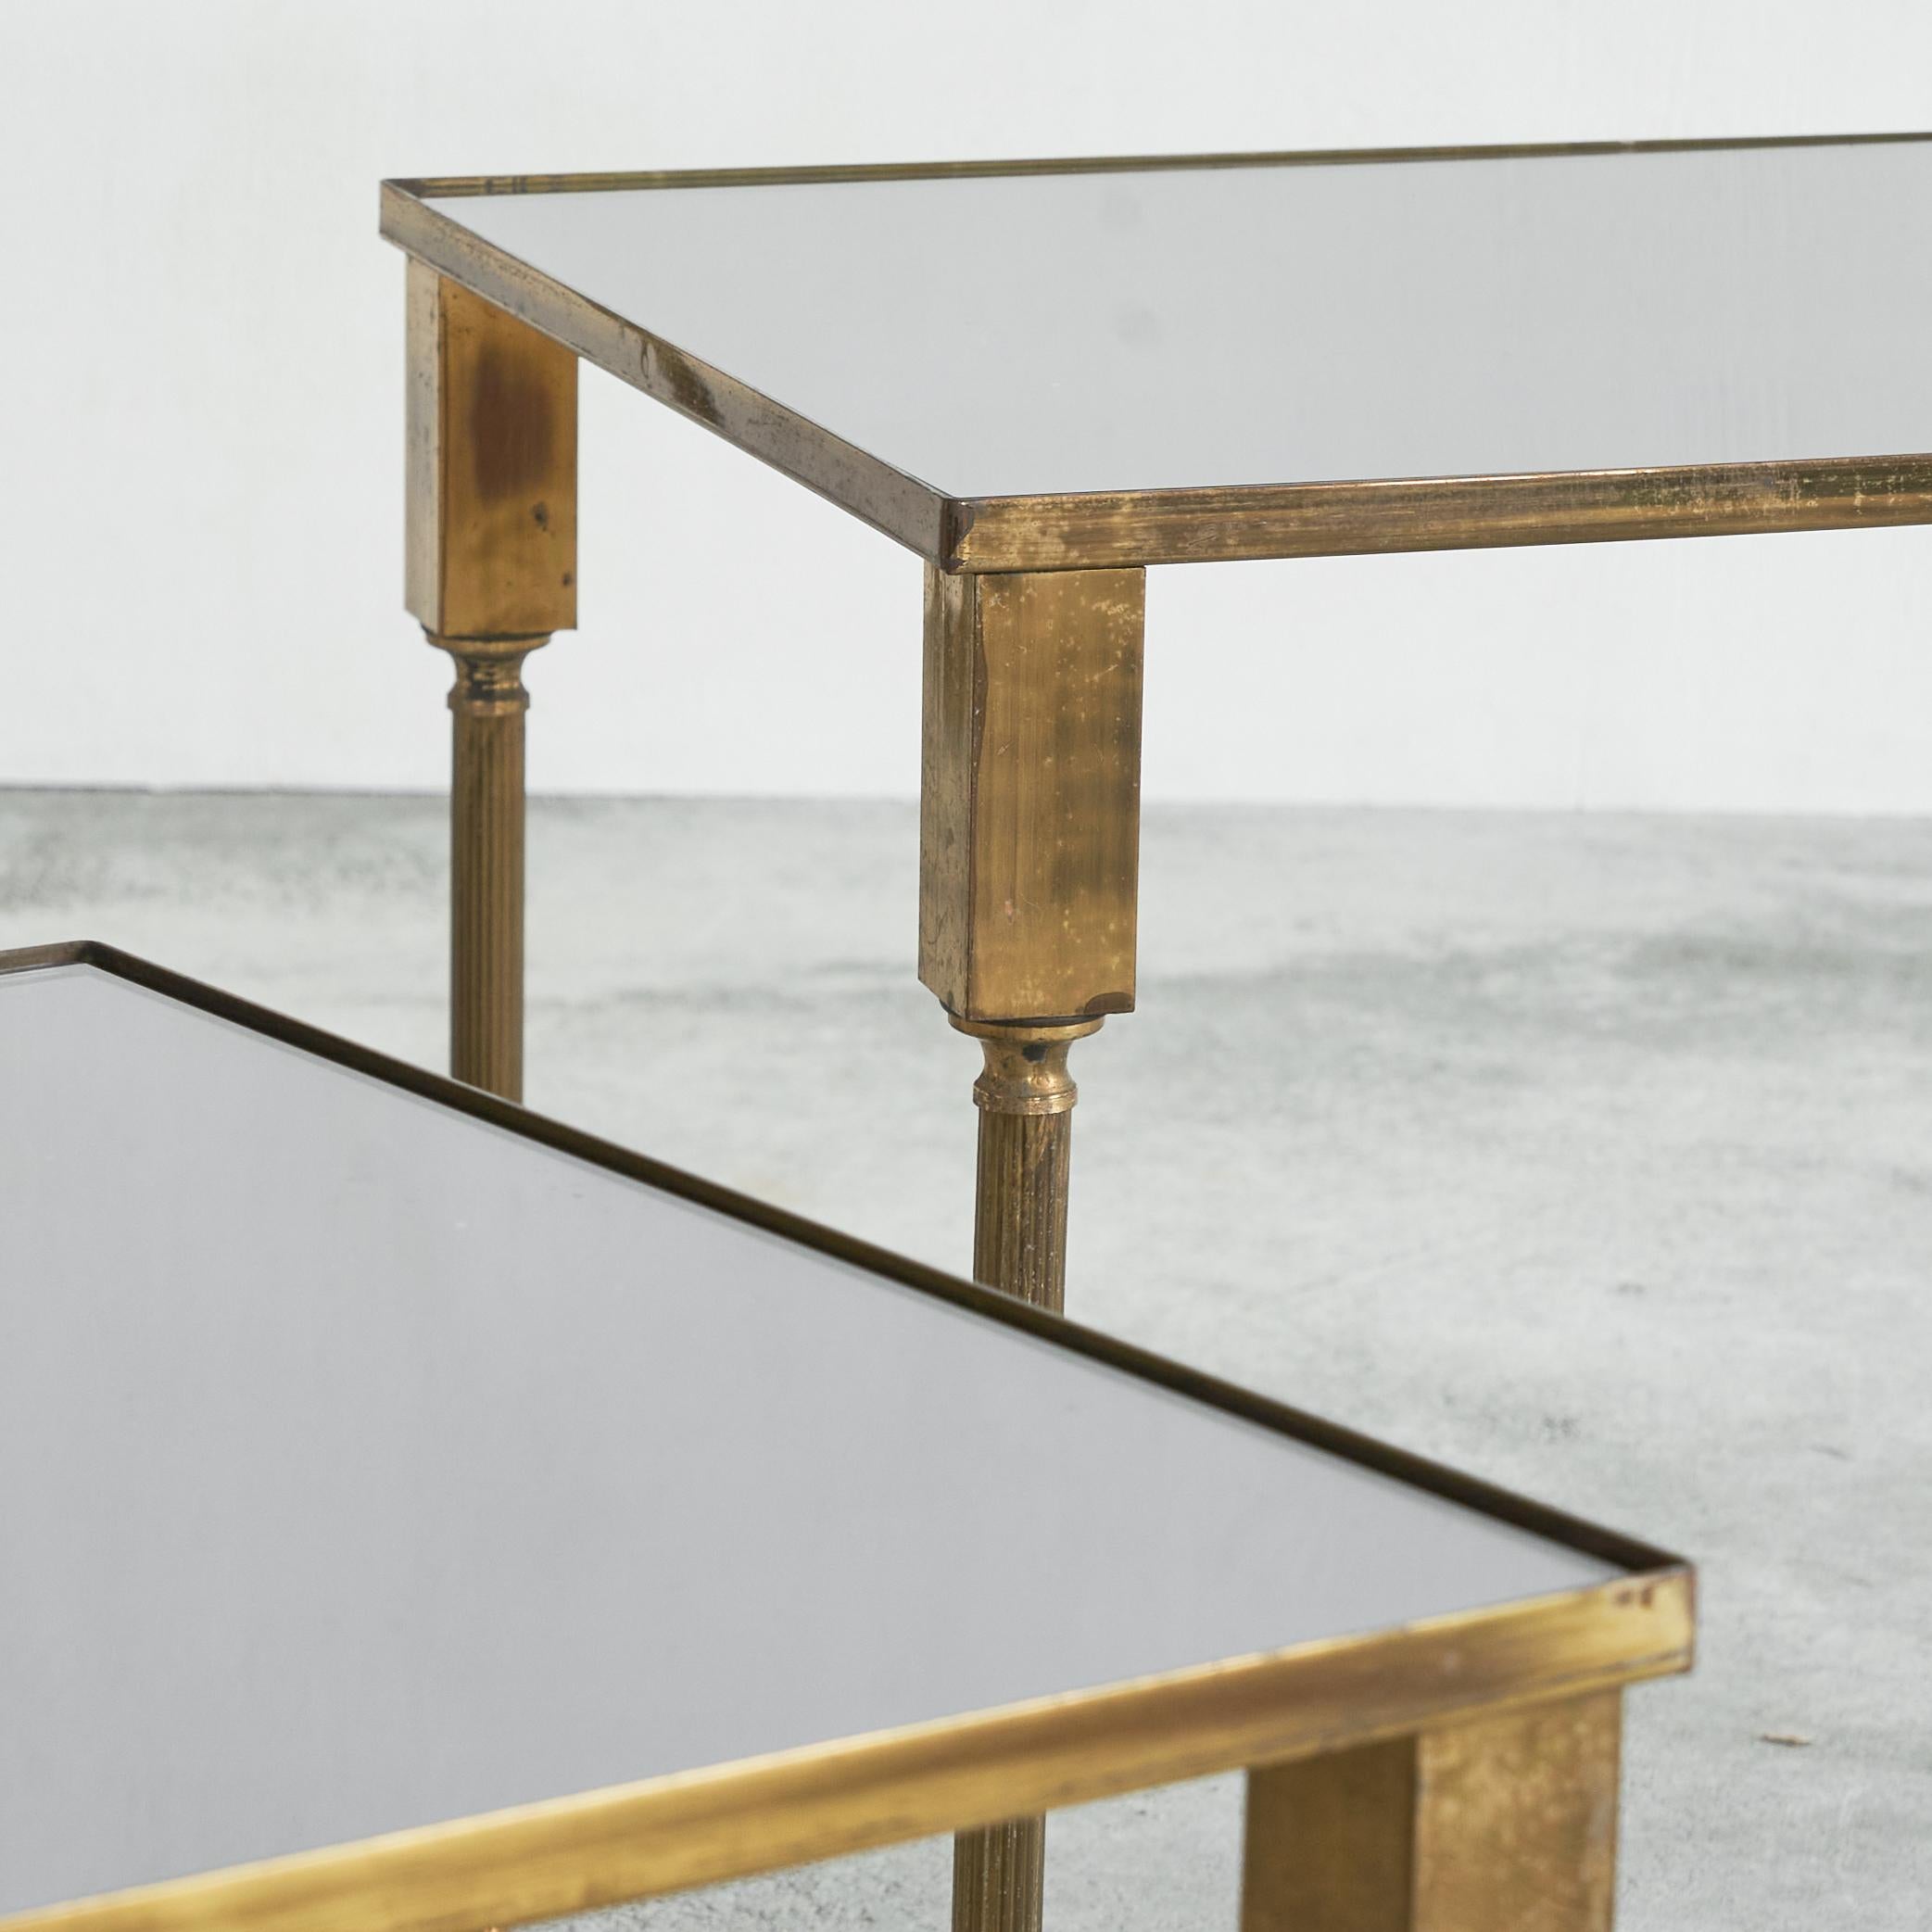 20th Century Maison Charles Set of 3 Nesting Tables in Patinated Brass and Mirror Glass 1960s